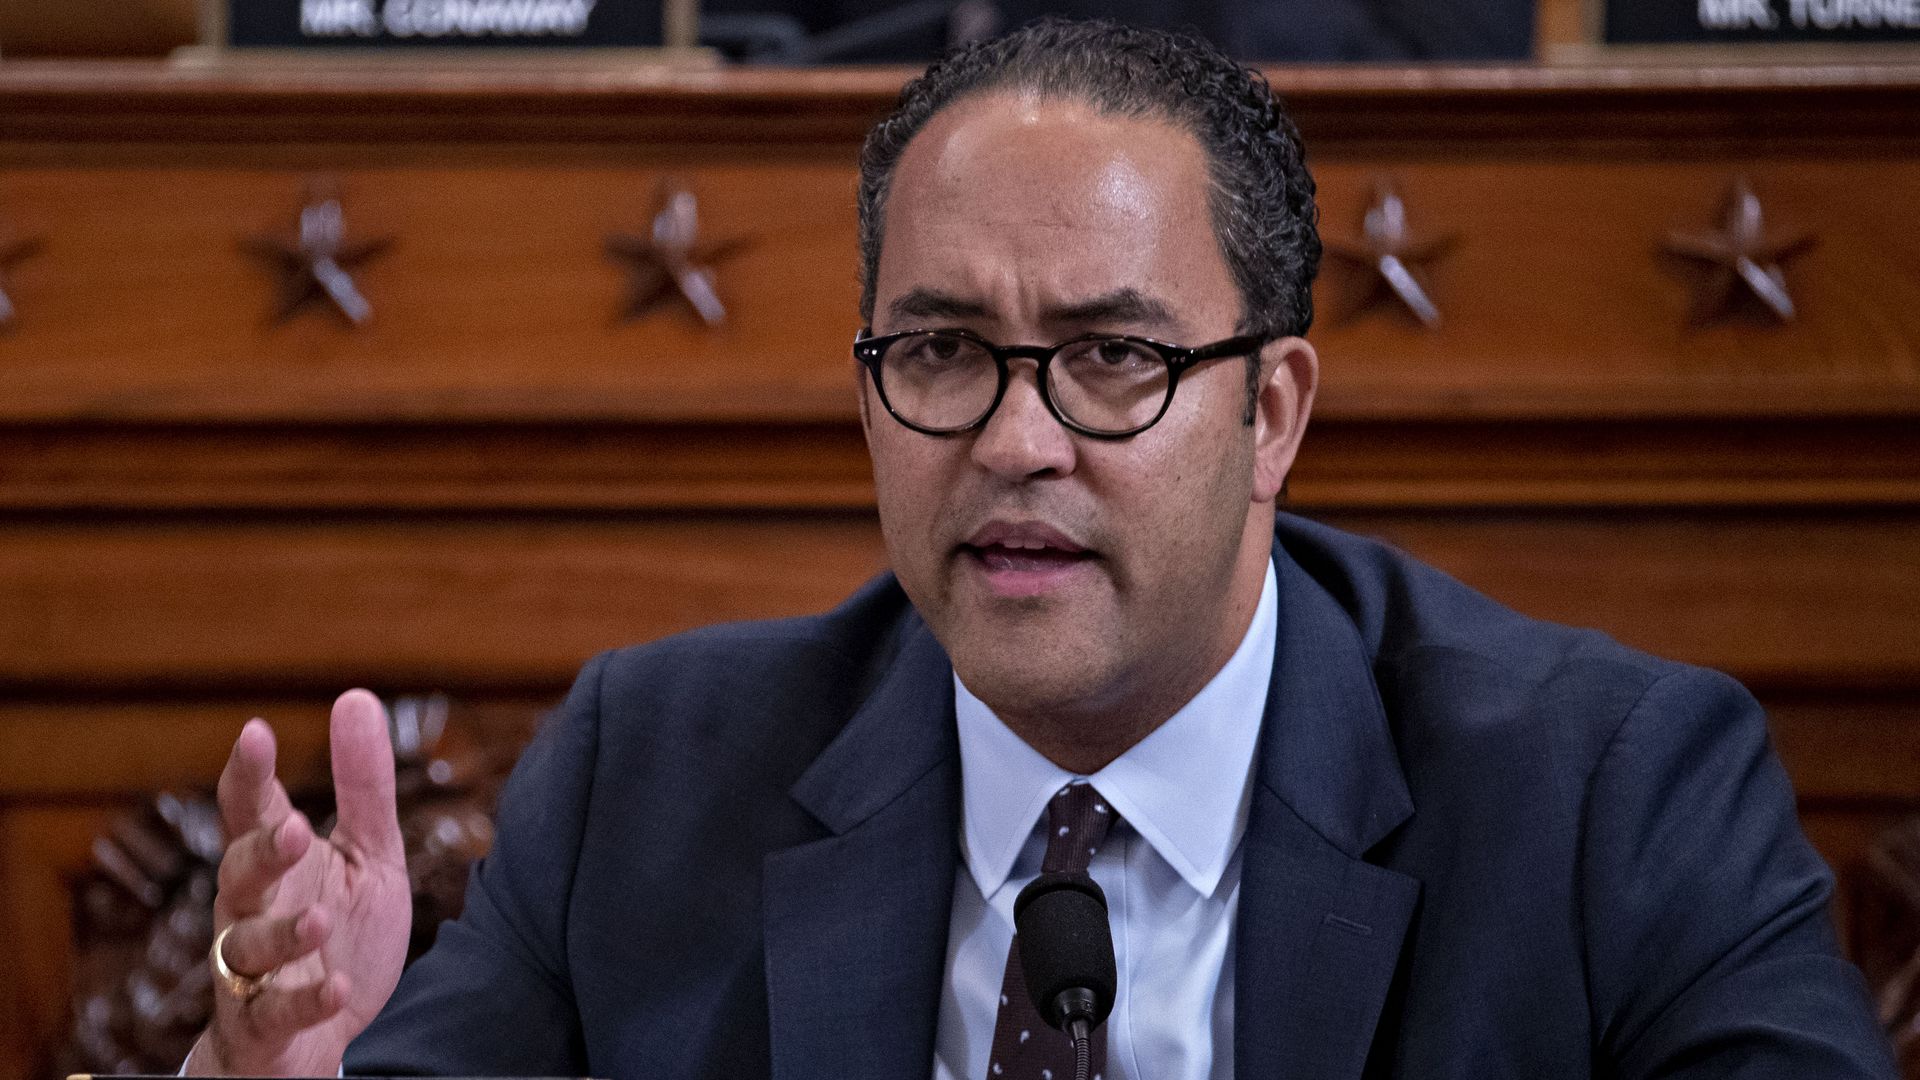 Former Rep. Will Hurd of Texas is seen speaking during a congressional hearing in 2019.